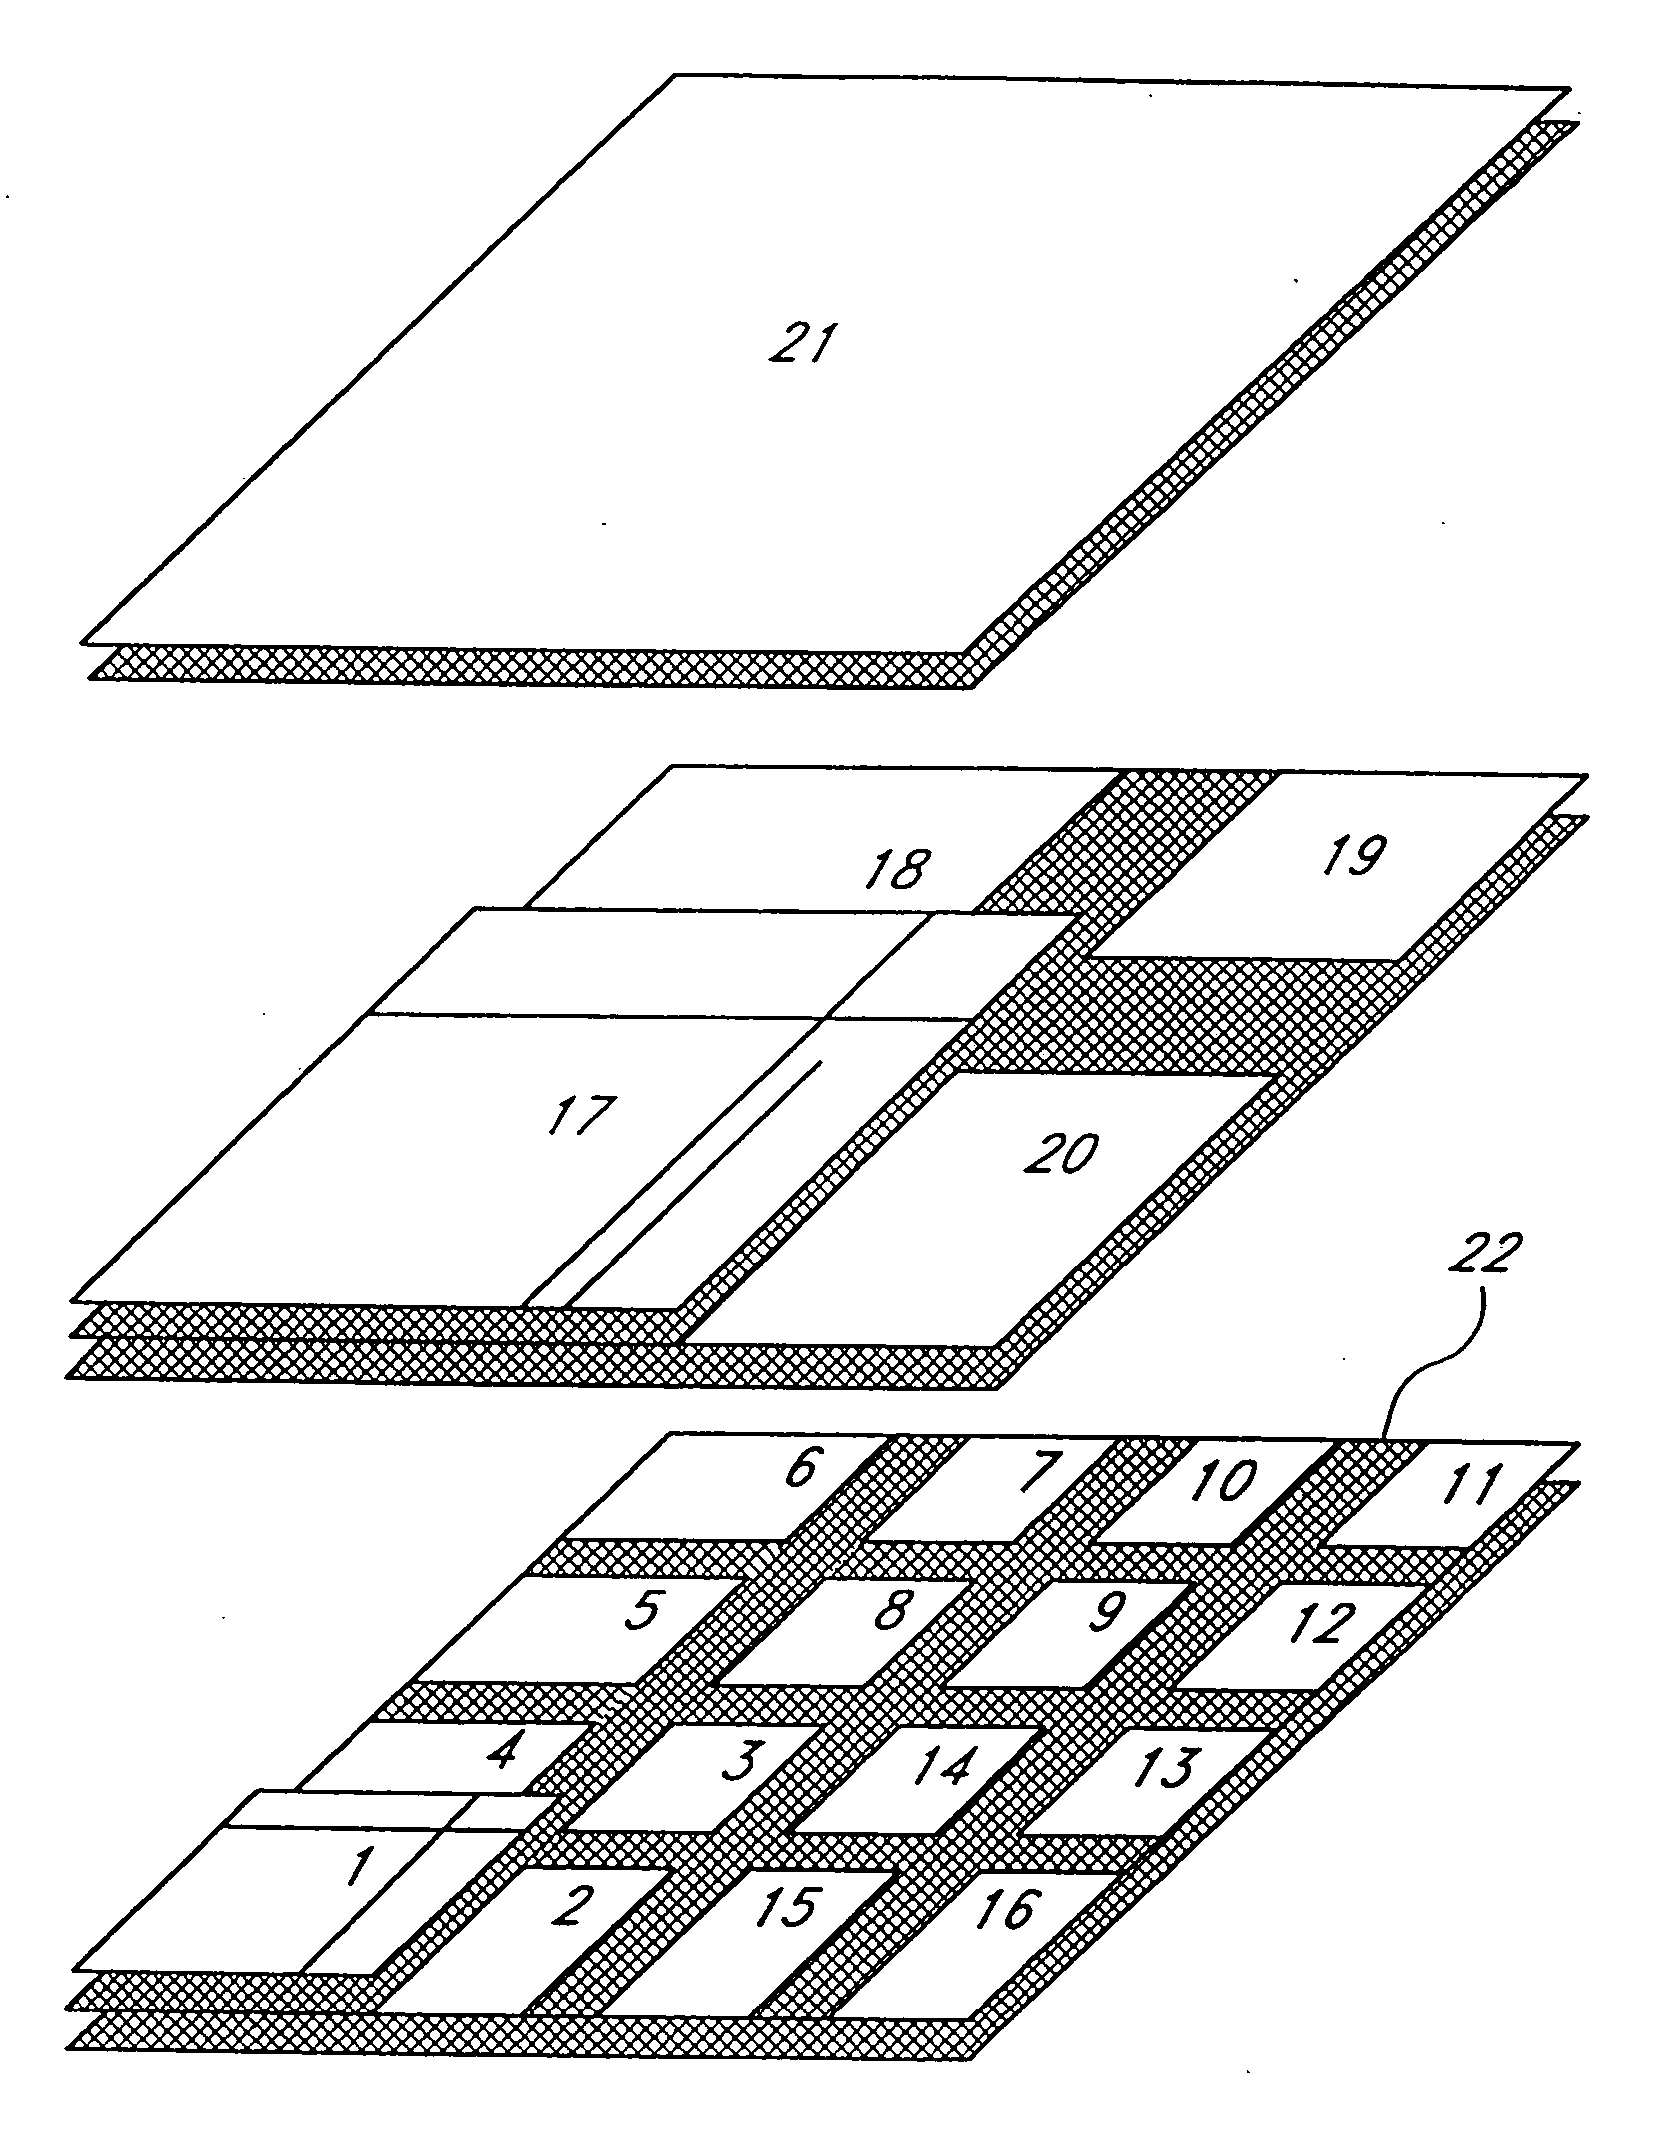 System and method of optimizing database queries in two or more dimensions